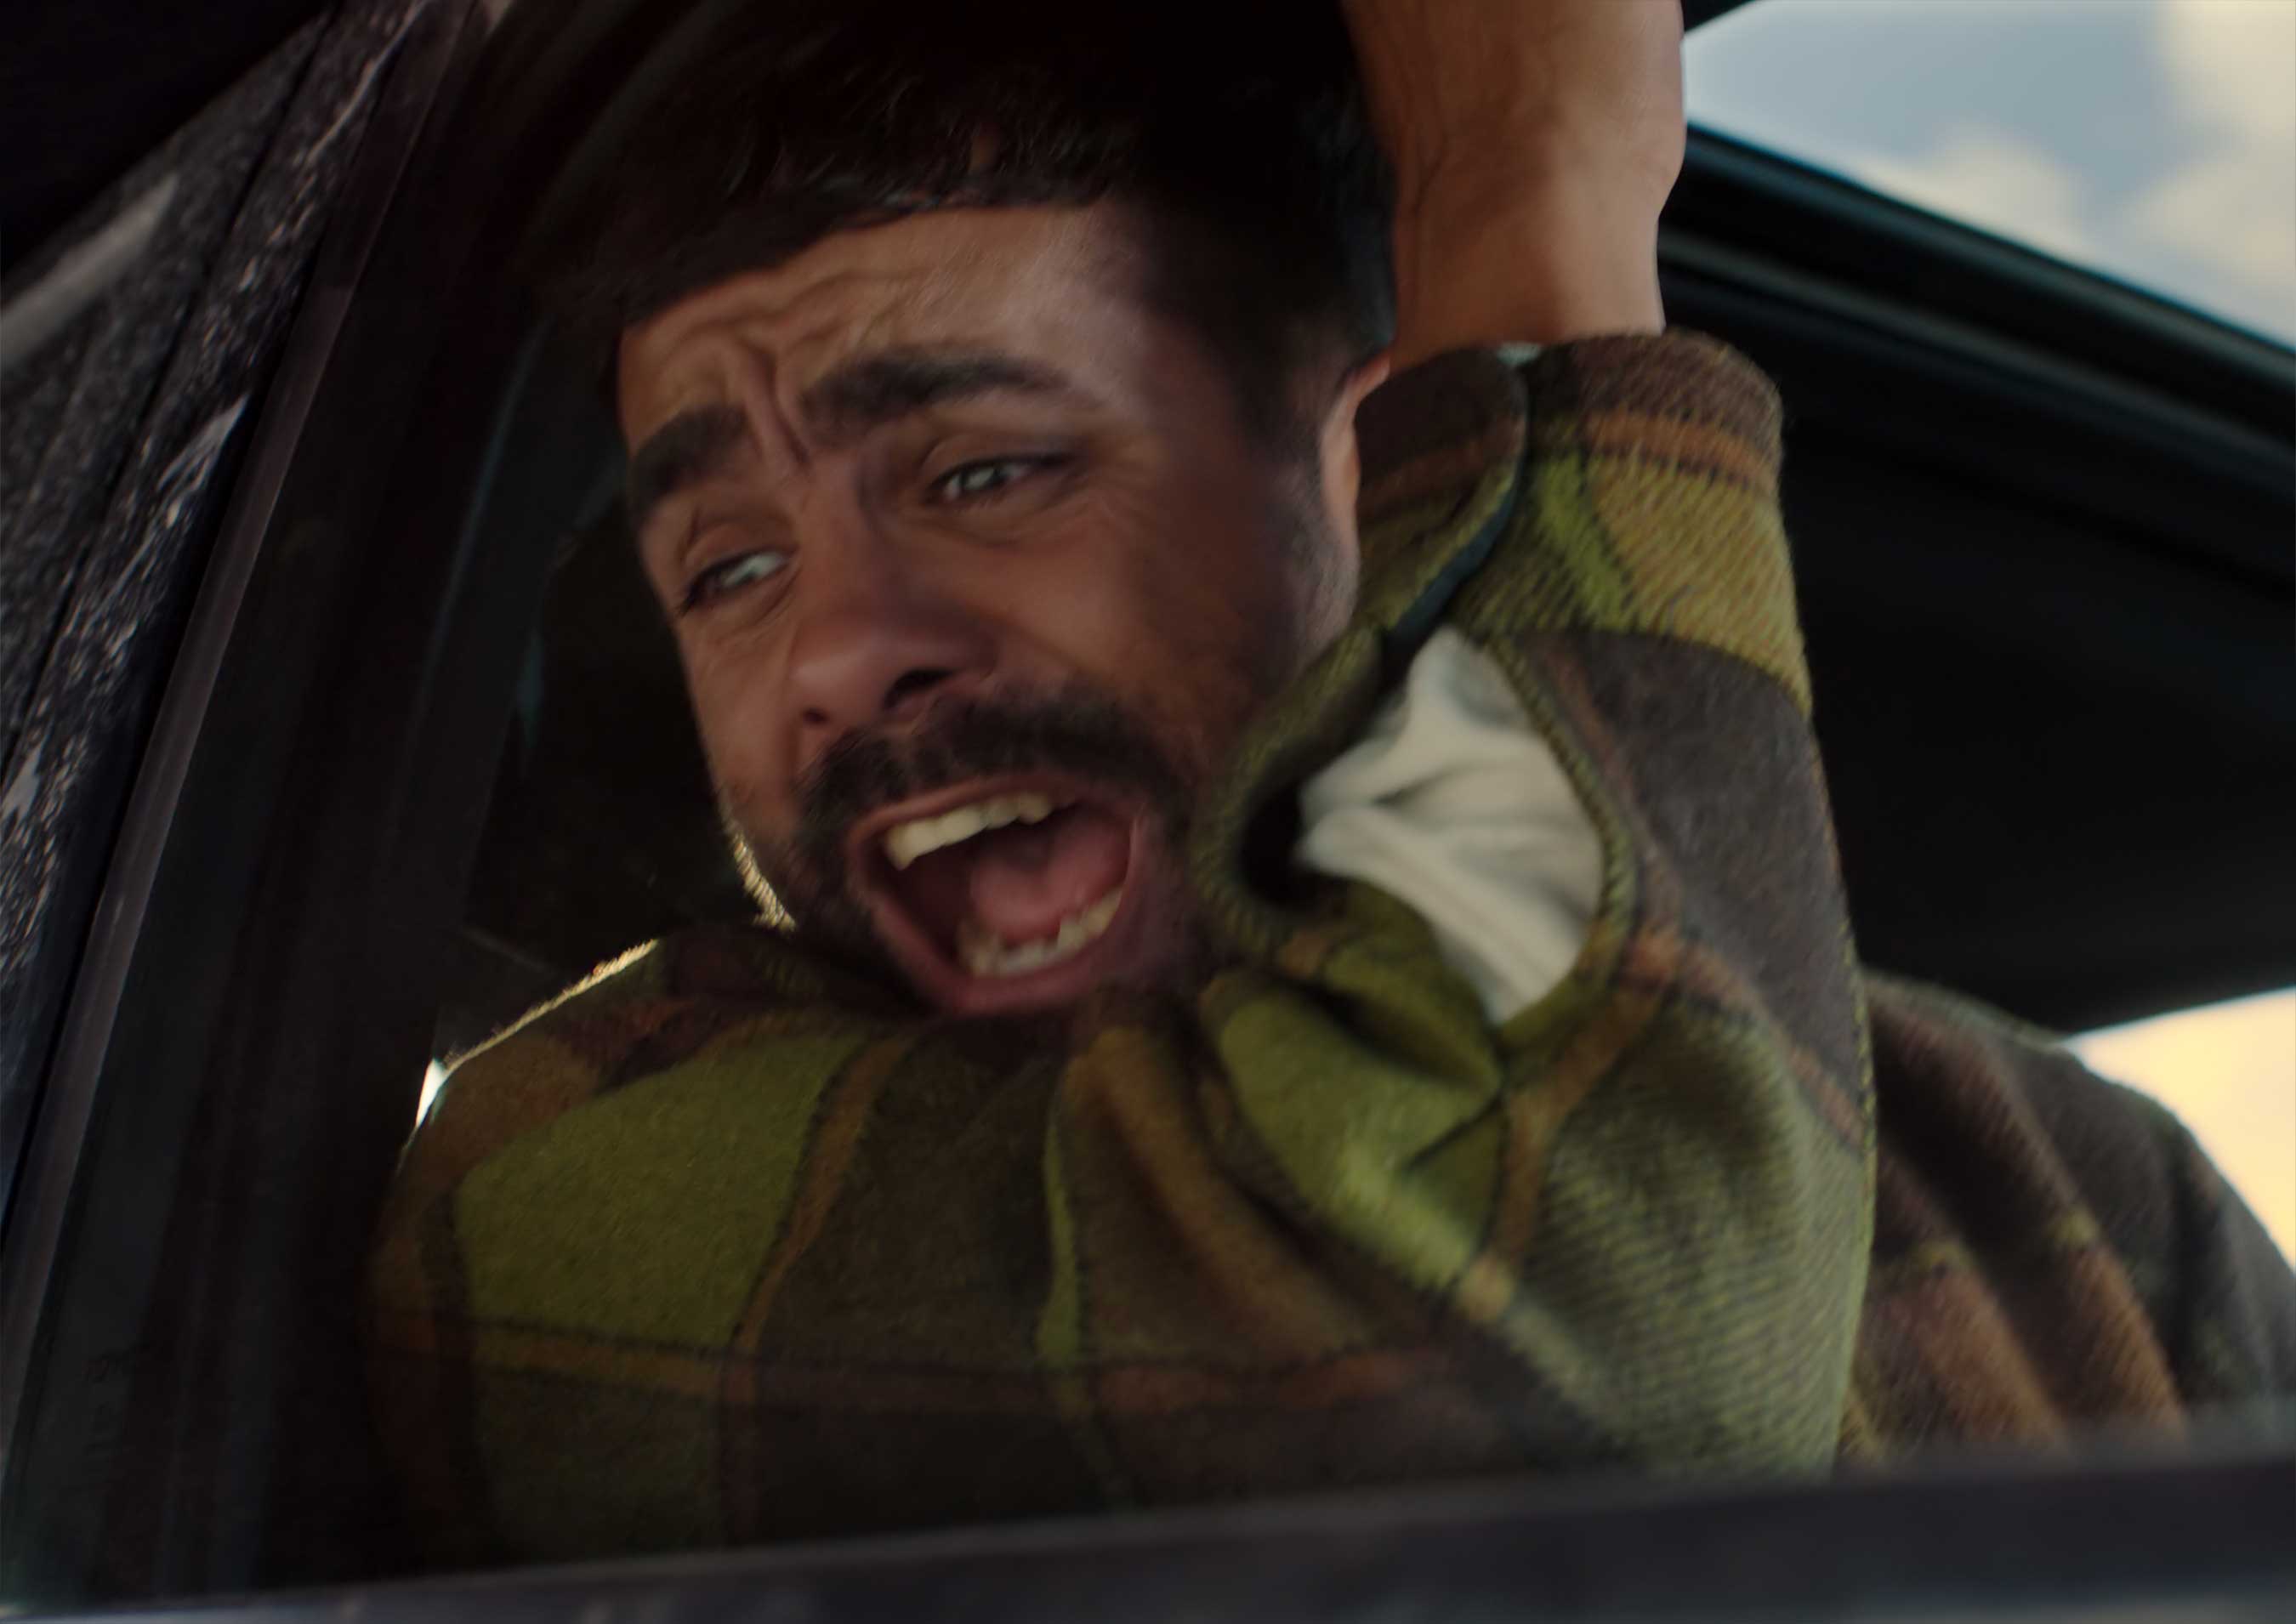 Toyota’s Super Bowl LVIII ad, “Dareful Handle,” highlights the range of emotions passengers experience as they grip the passenger side handle for dear life.